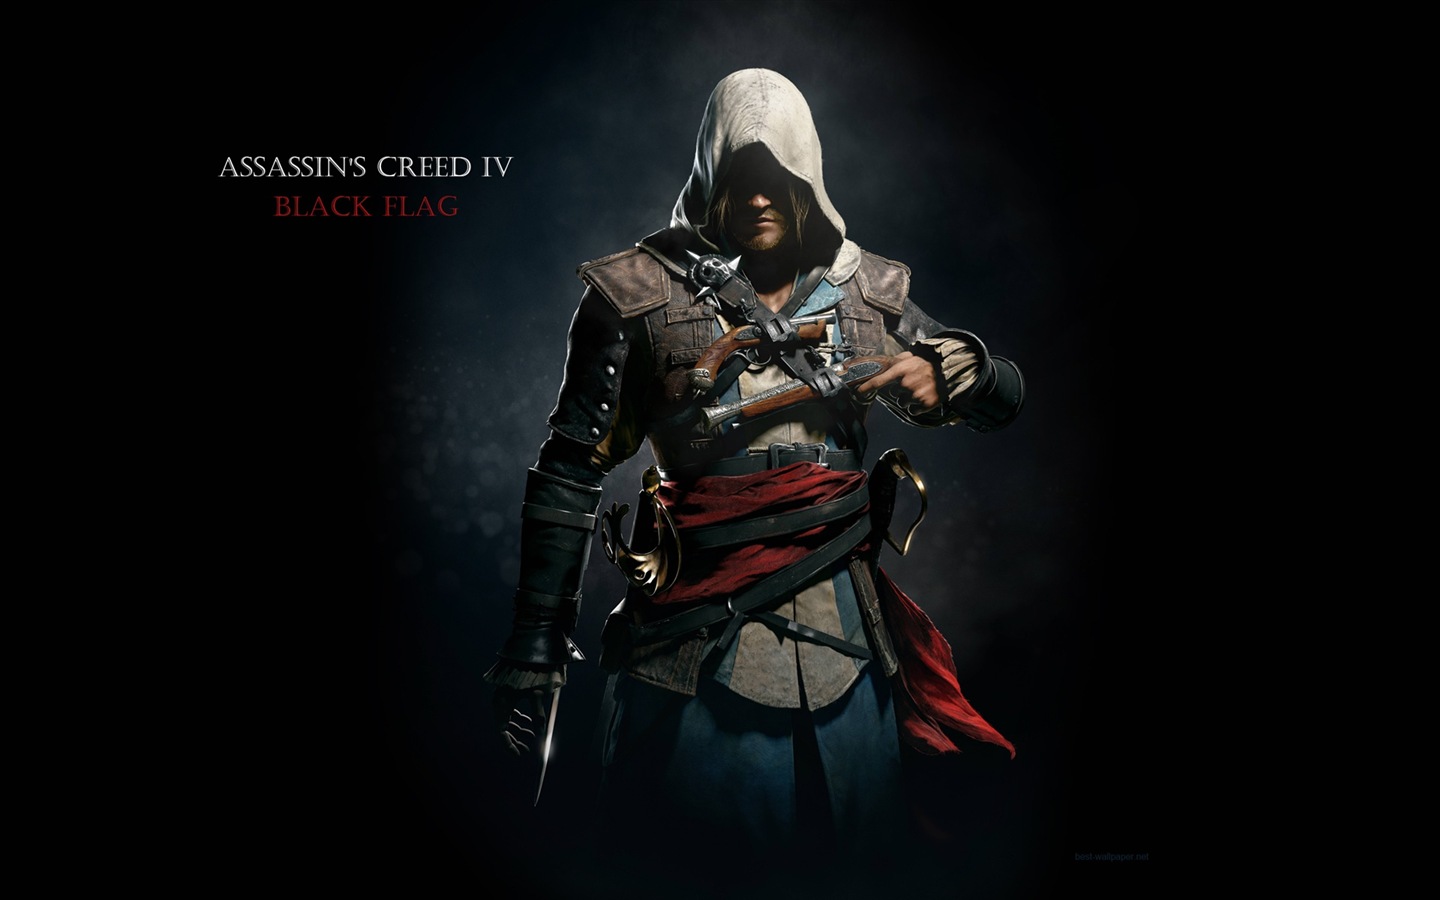 Creed IV Assassin: Black Flag HD wallpapers #9 - 1440x900